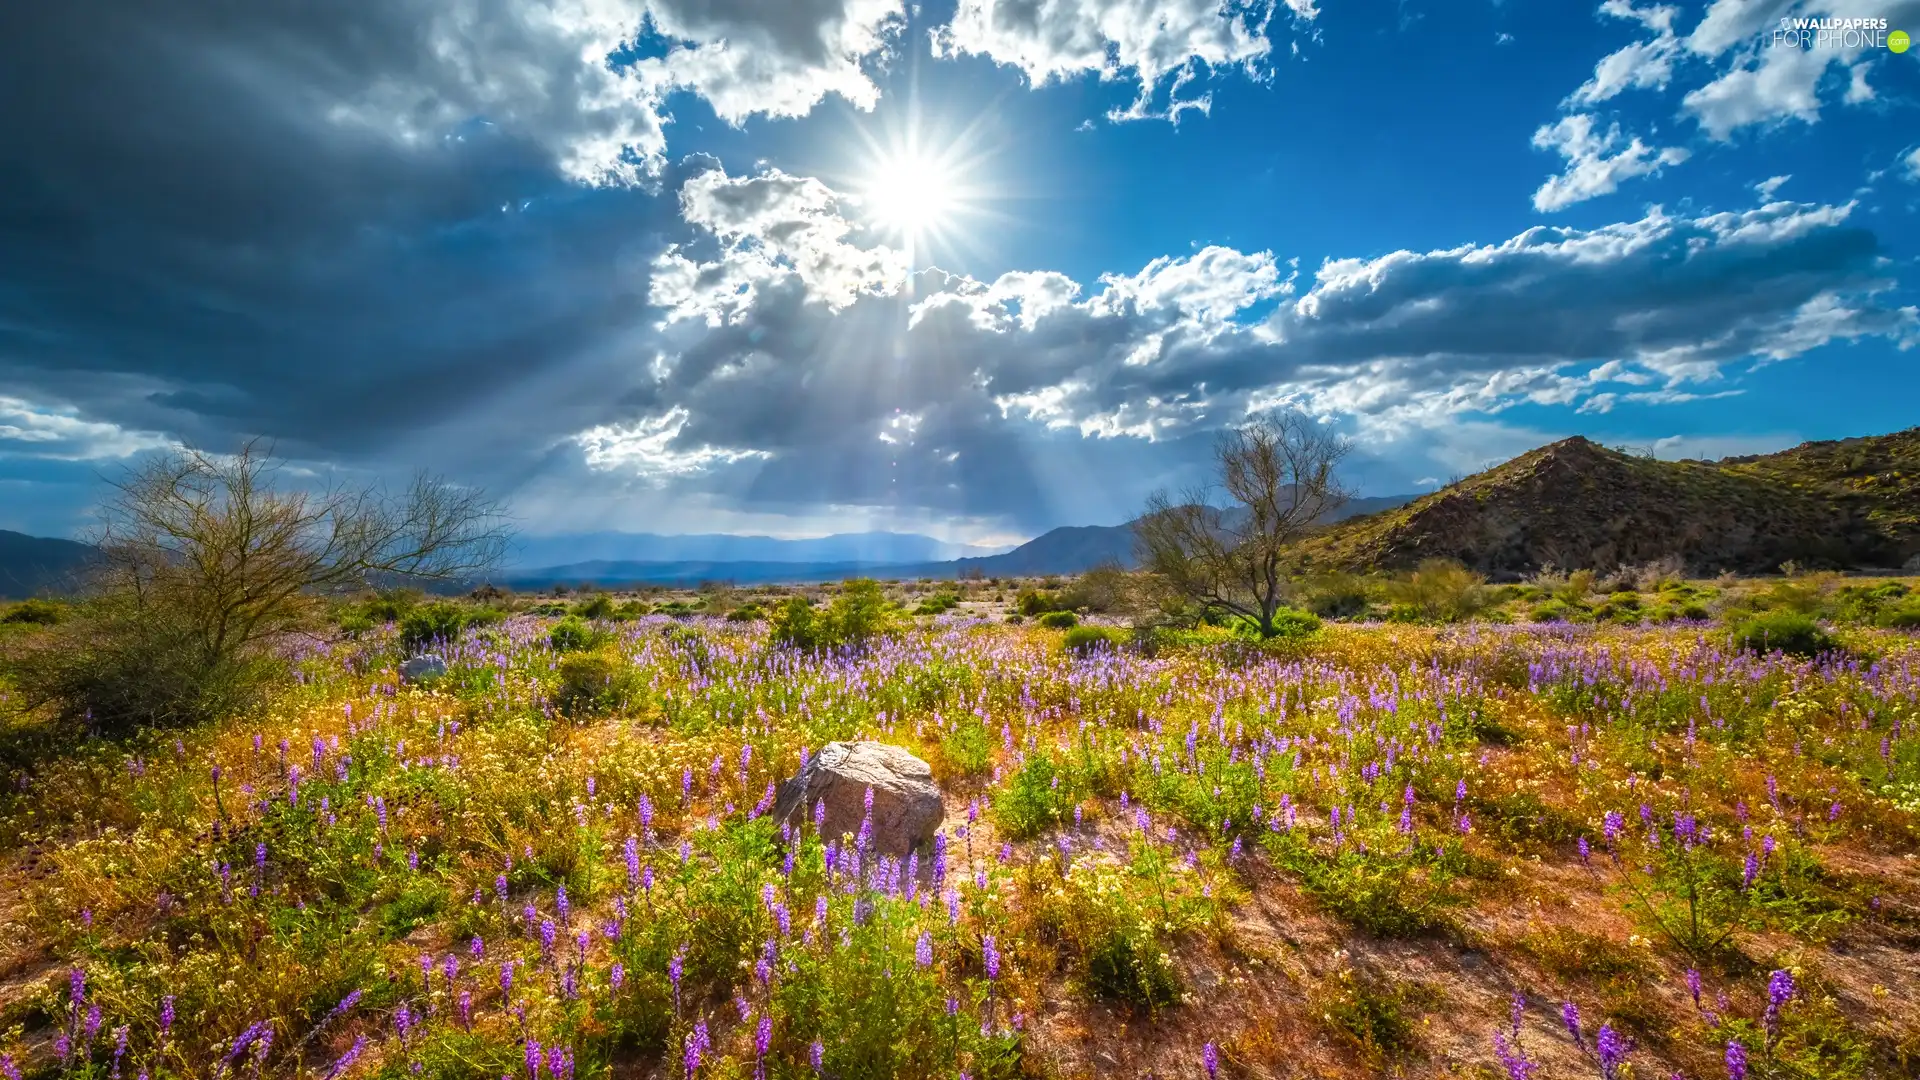 purple, Flowers, clouds, trees, rays of the Sun, Meadow, The Hills, VEGETATION